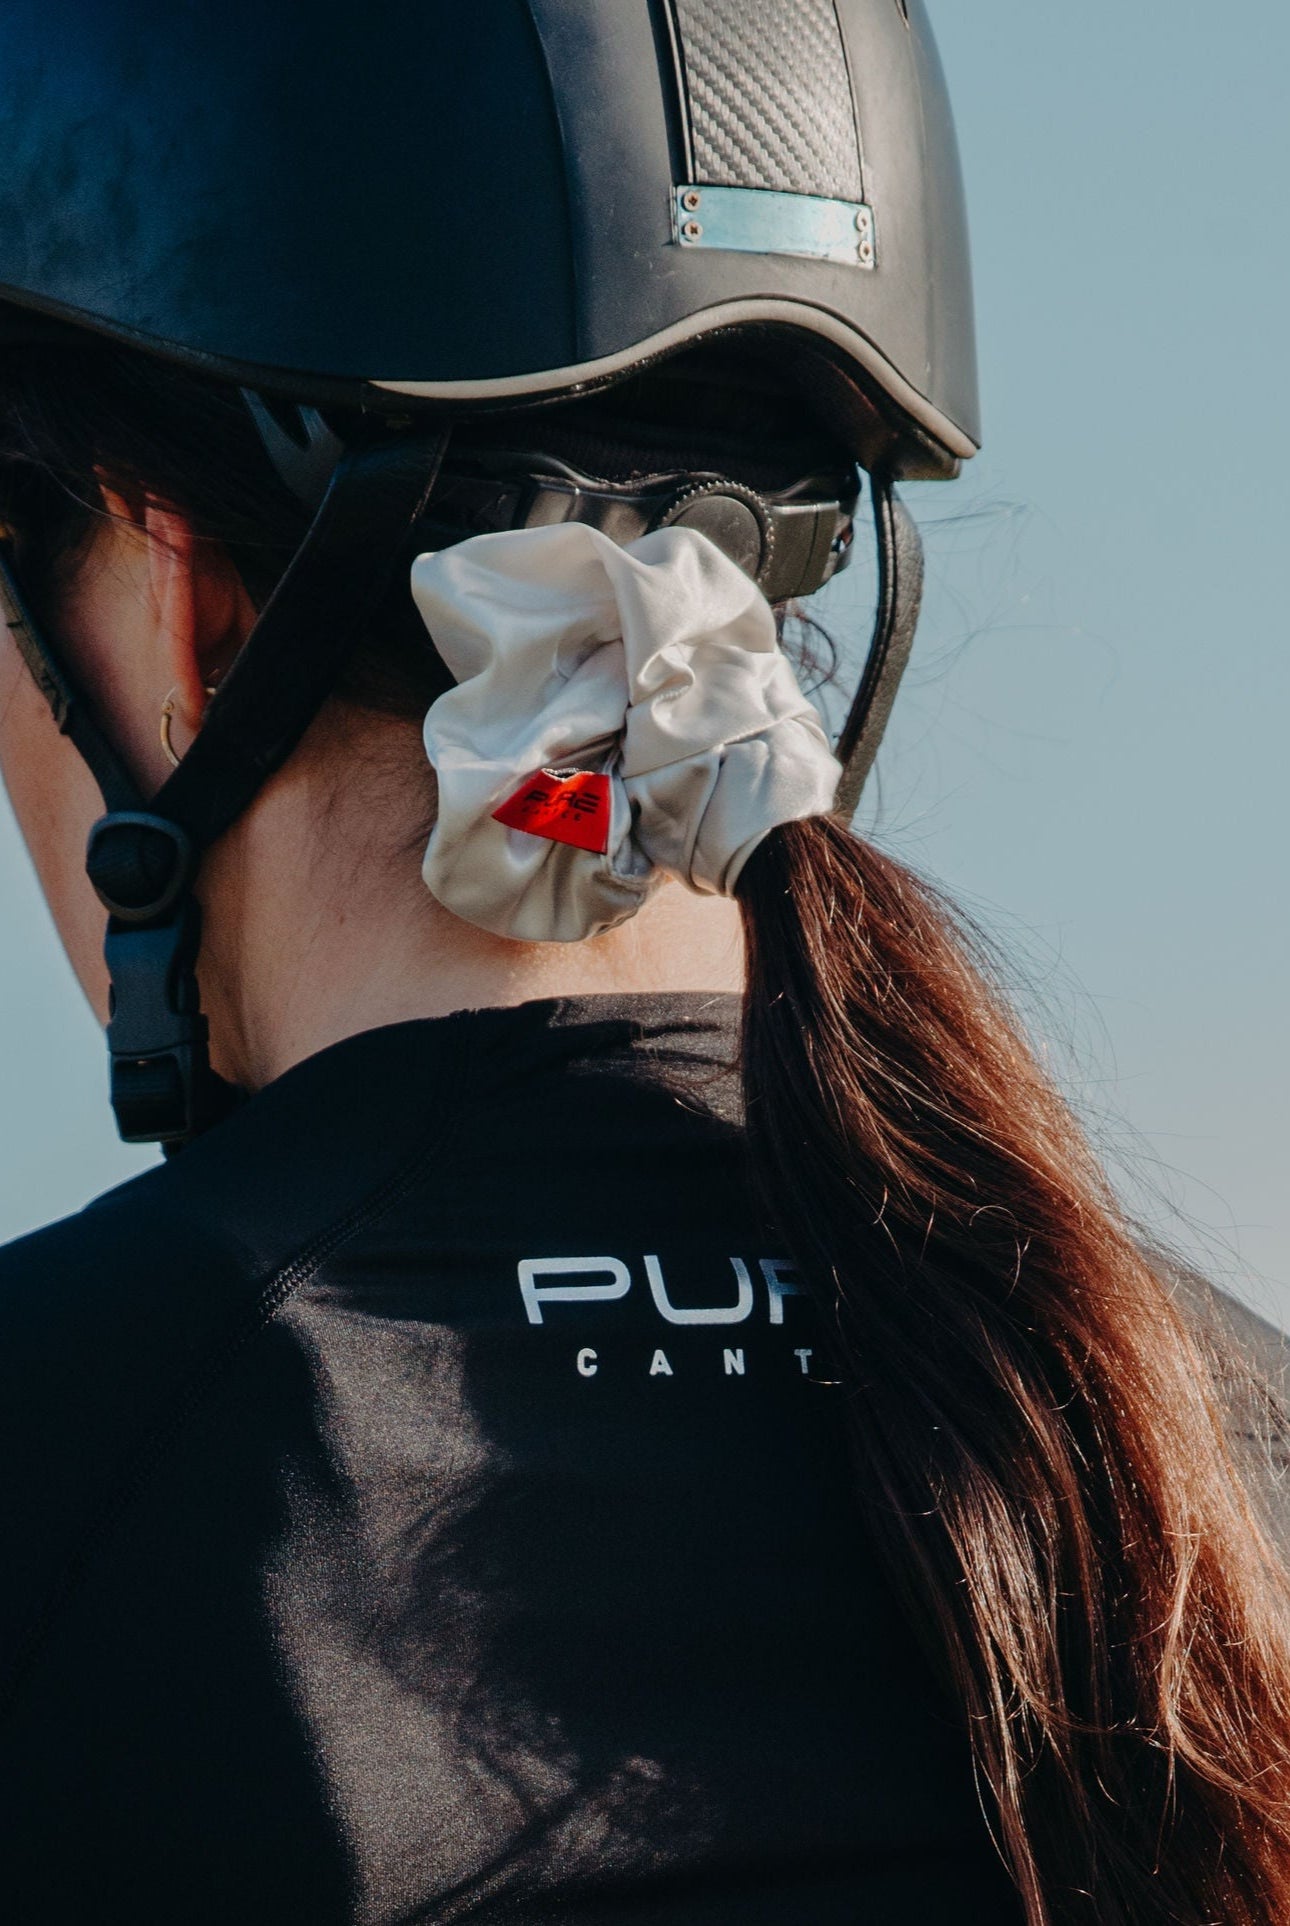 Person wearing a black helmet and a black shirt with "PUR" printed on it. Their long hair is tied back with one of those beautiful **Pure Canter Pty Ltd Oversized Scrunchies**, and they are facing away from the camera against a blurred, outdoor background.